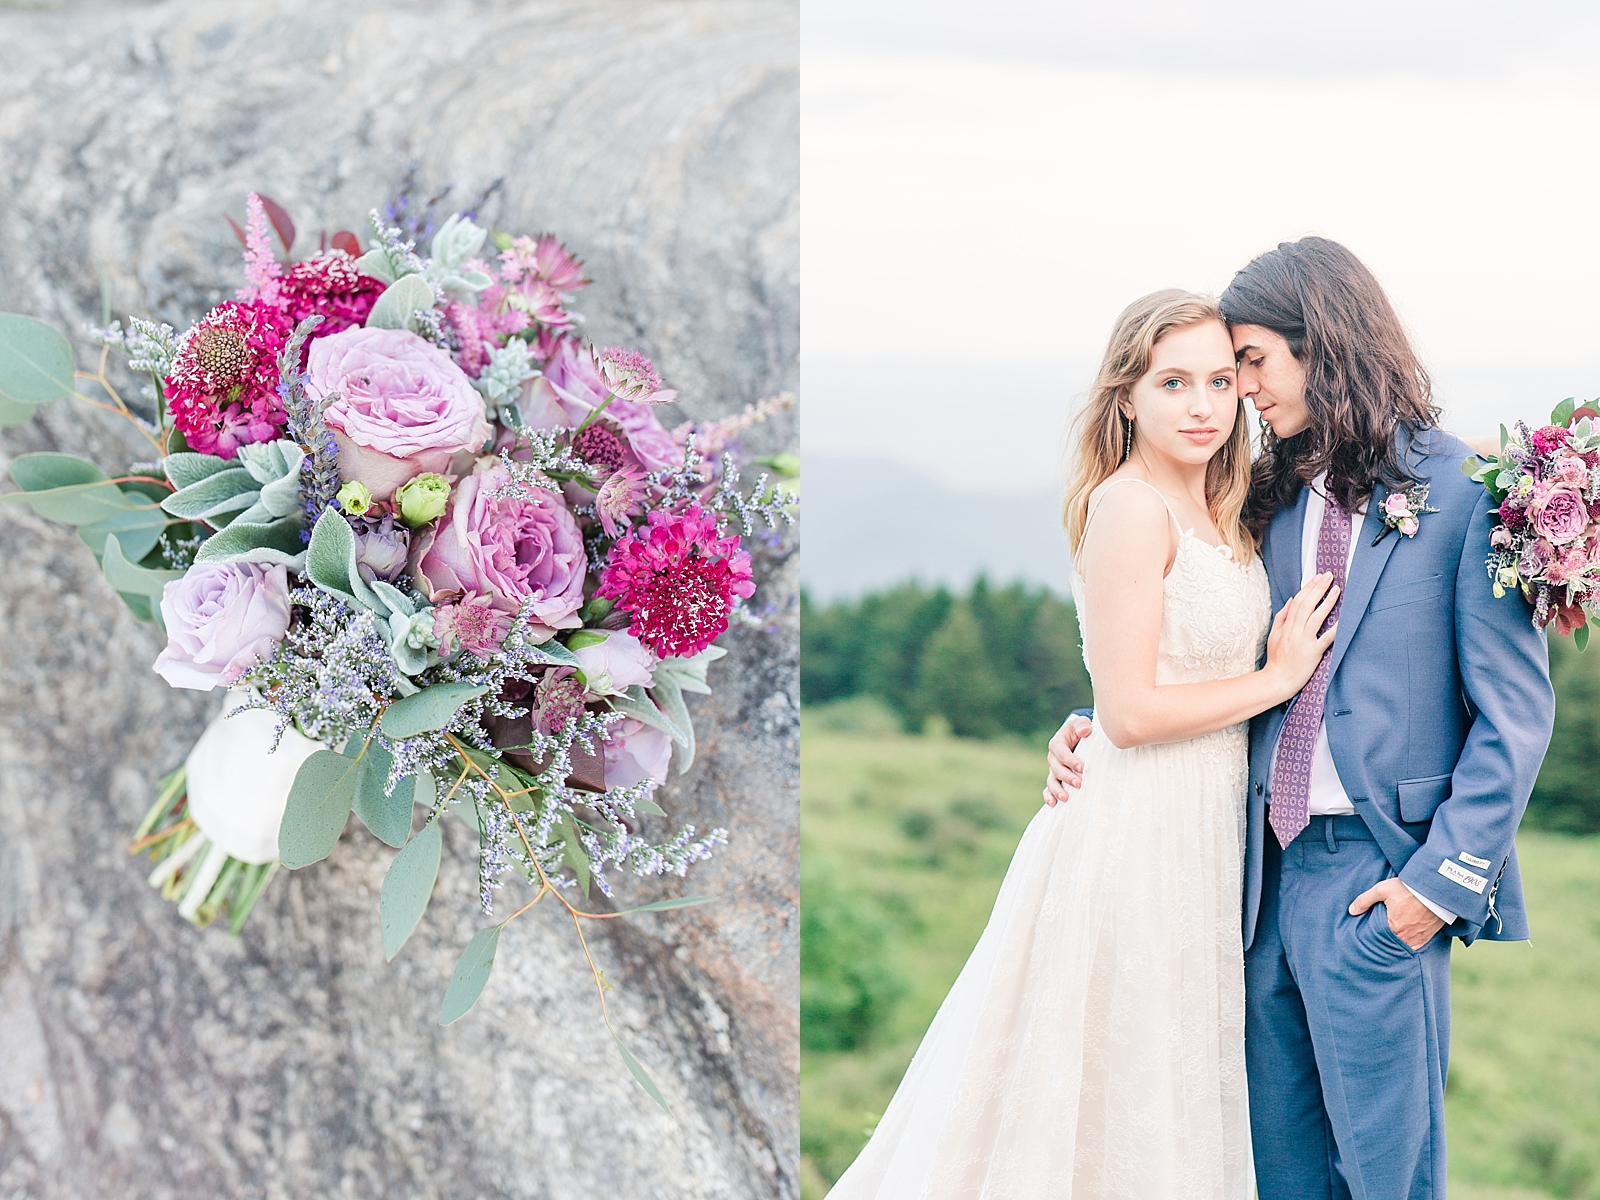 Black Balsam Knob Elopement Flower detail and Bride and Groom Embracing each other Photos